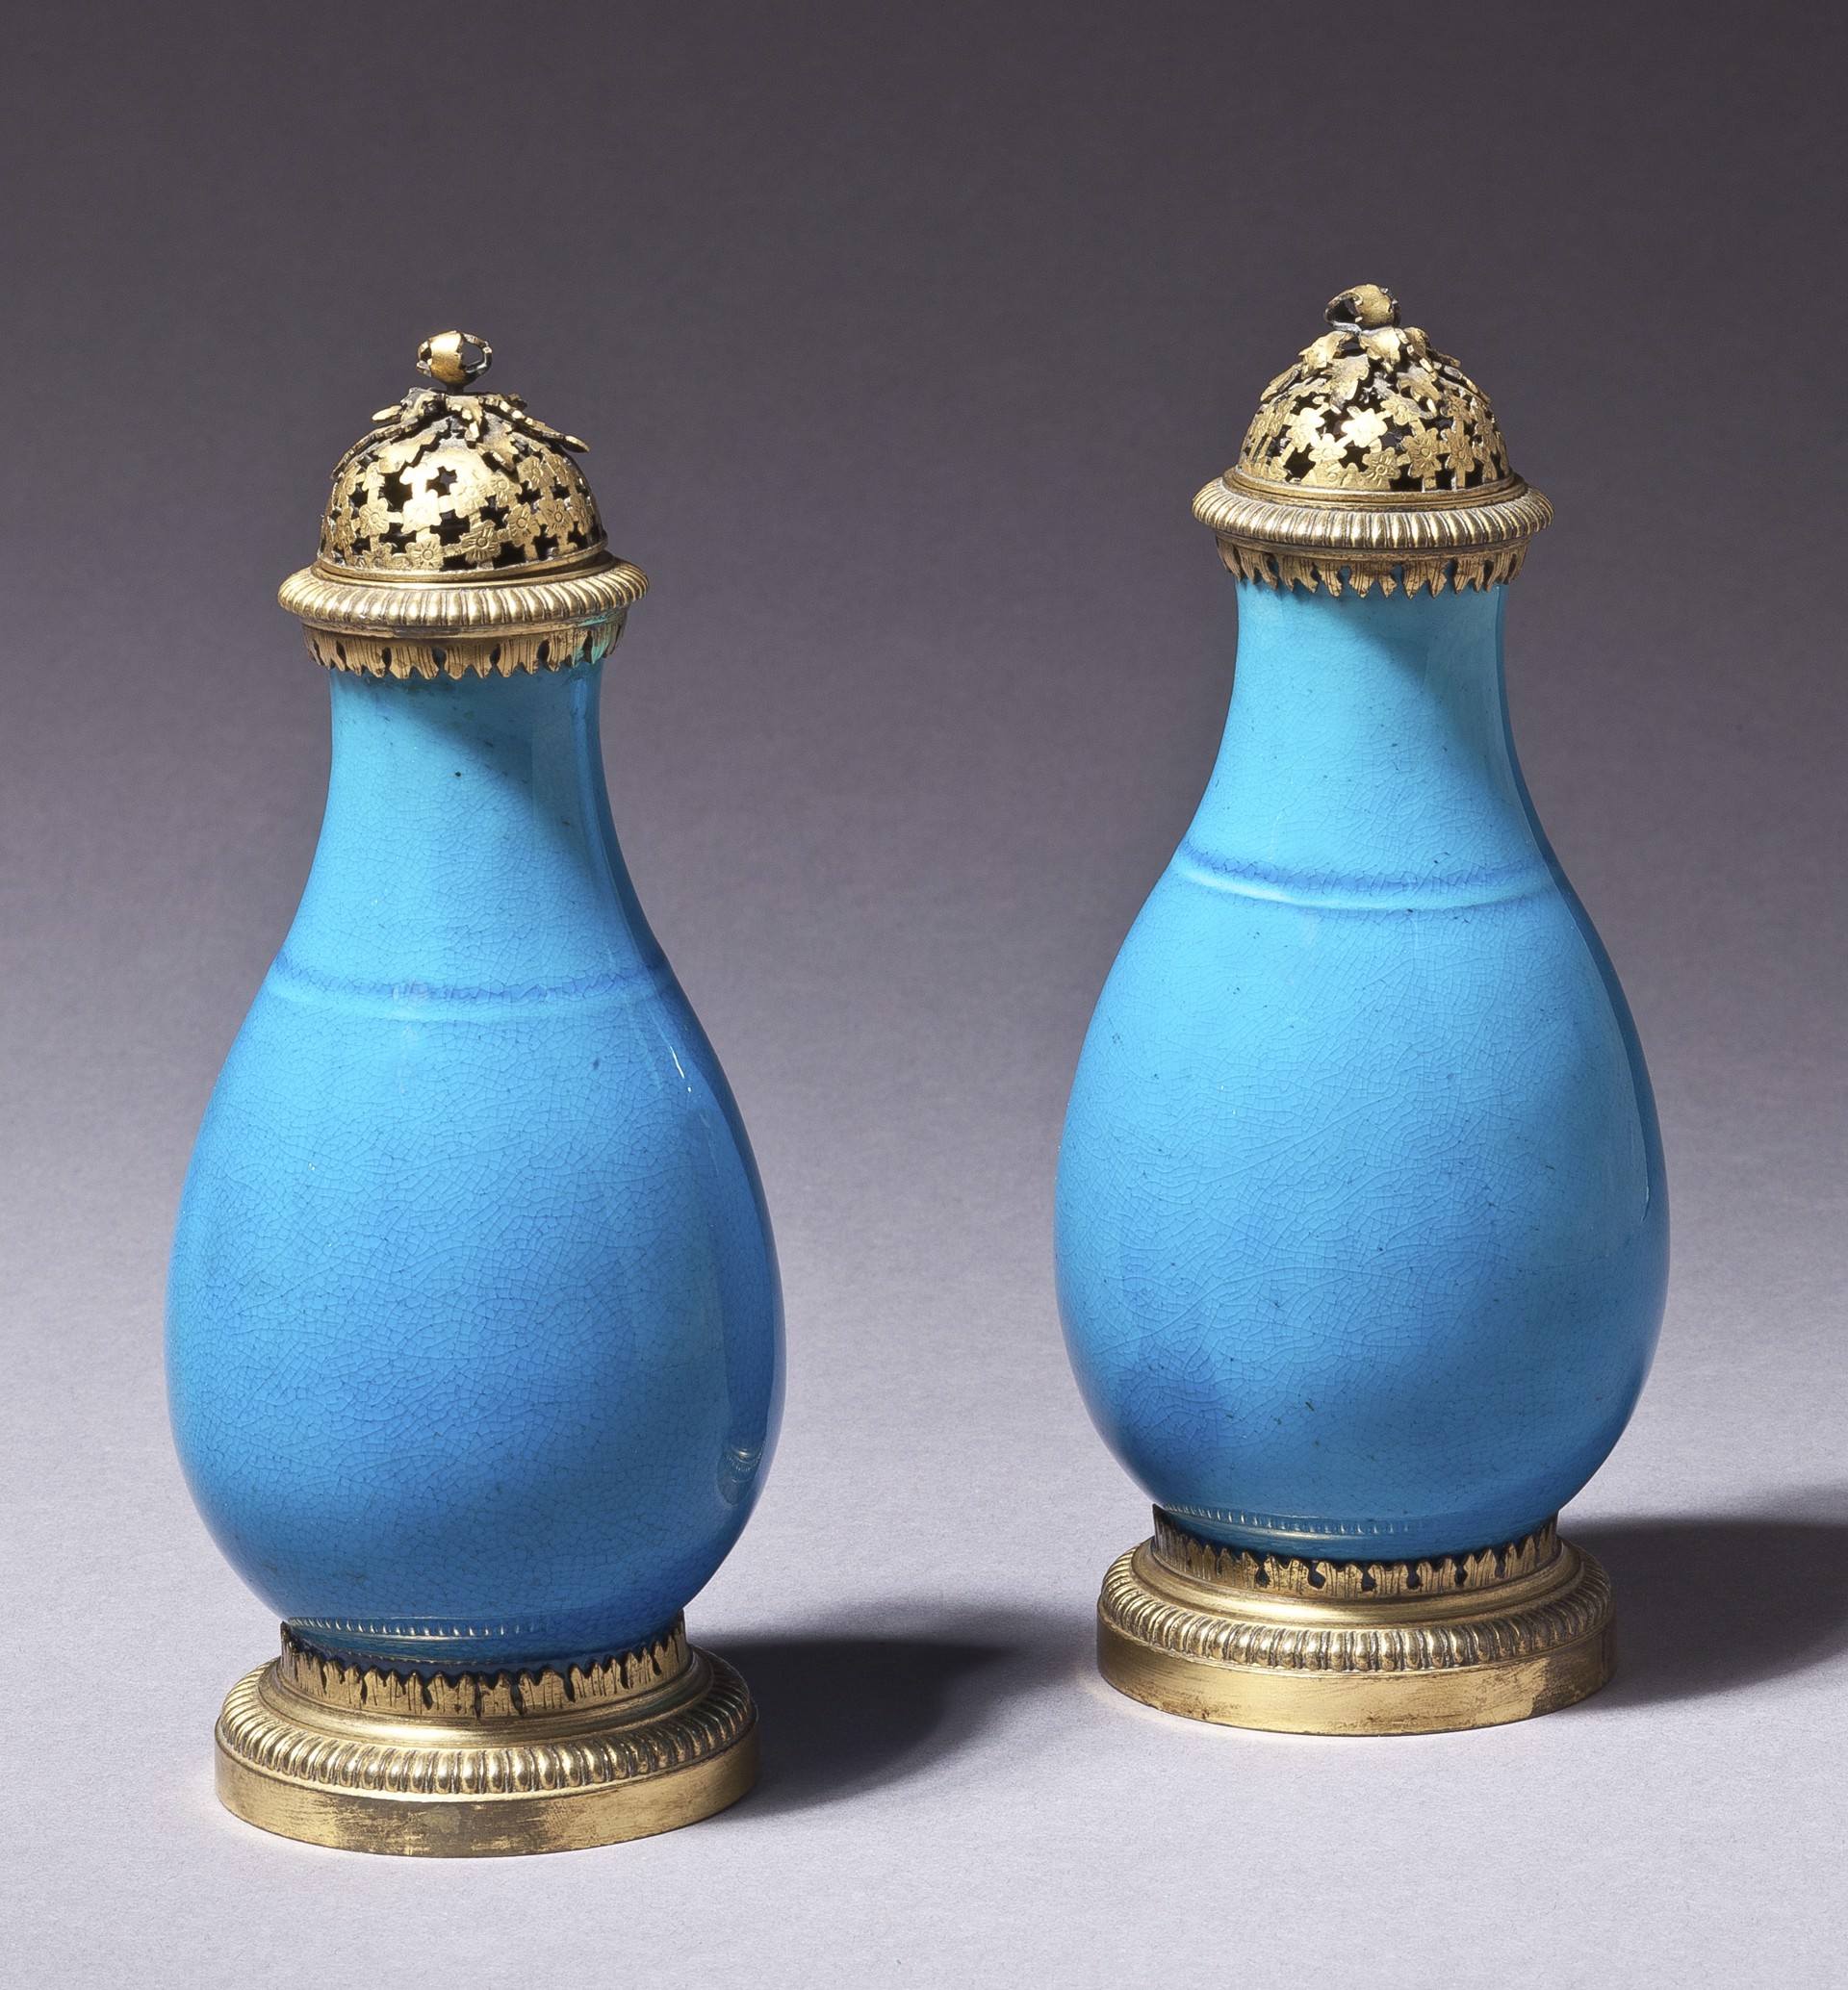 PAIR OF CHINESE GILT METAL MOUNTED TURQUOISE GLAZED PORCELAIN PERFUMERS